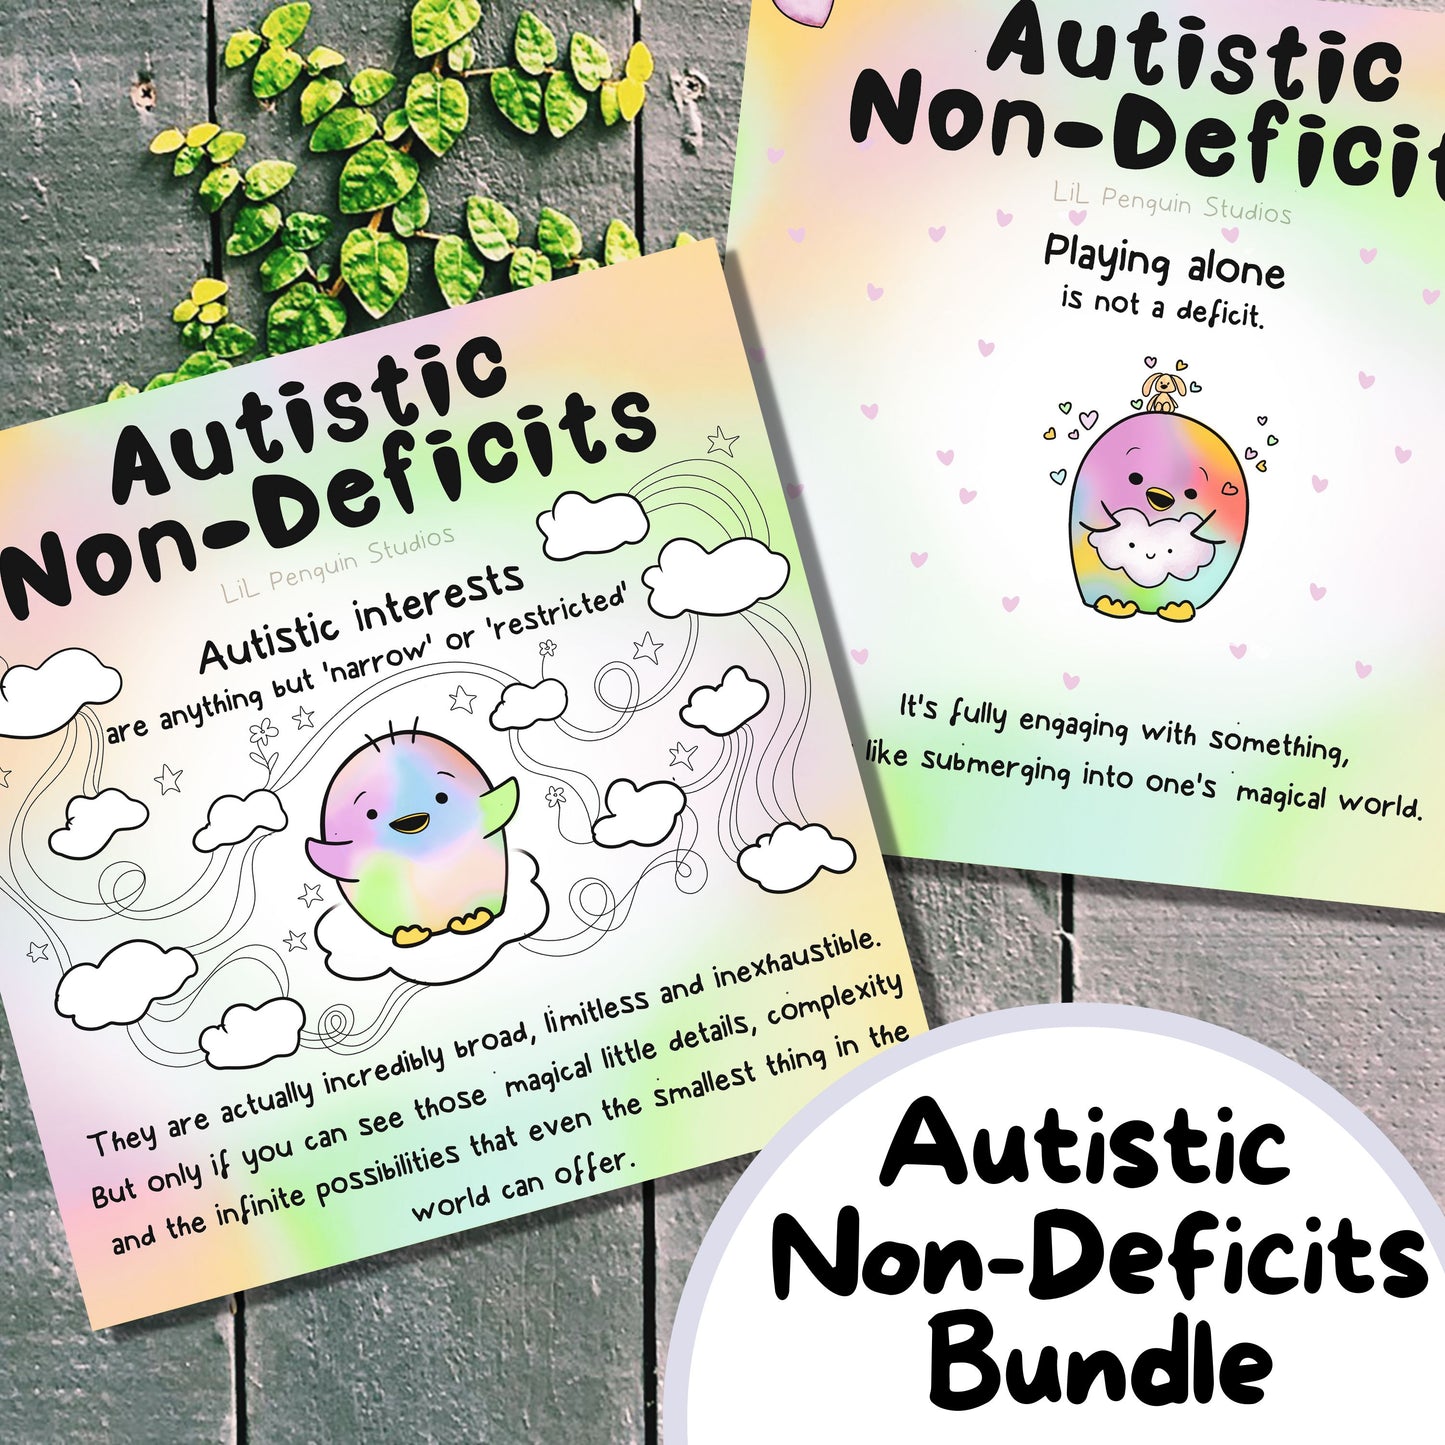 Autistic Non-Deficits Printable Bundle (there are two artworks shown about autistic special interests and and playing alone)